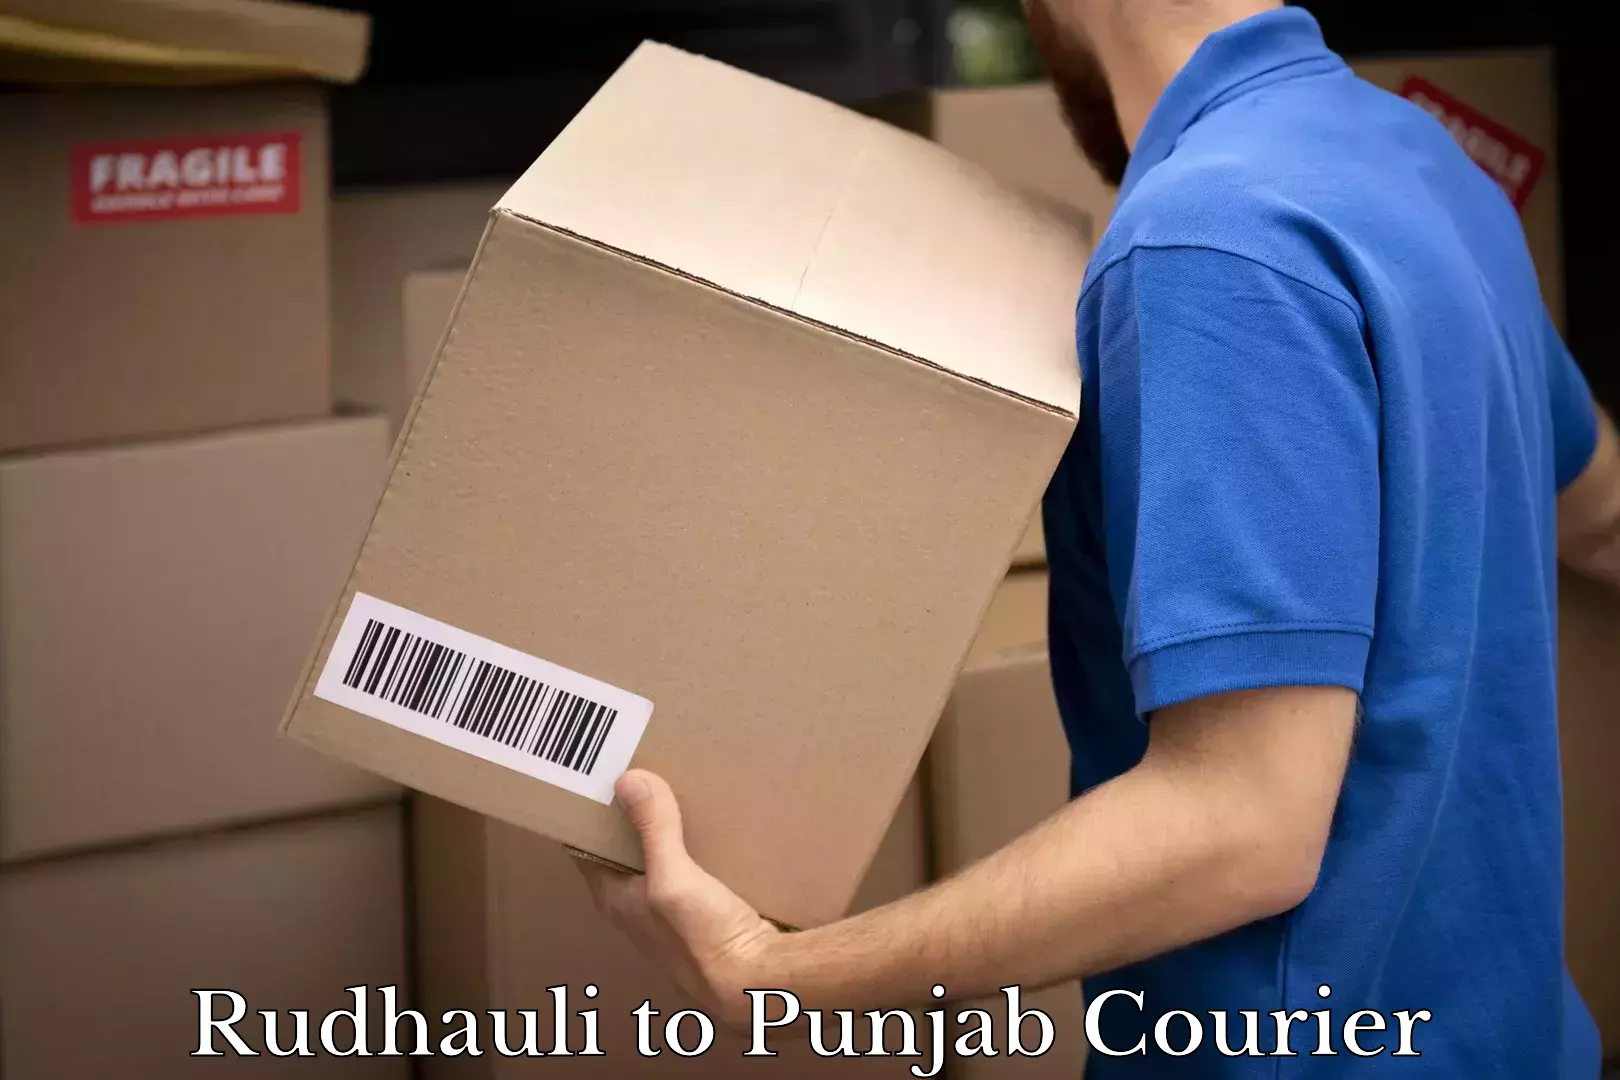 State-of-the-art courier technology Rudhauli to Punjab